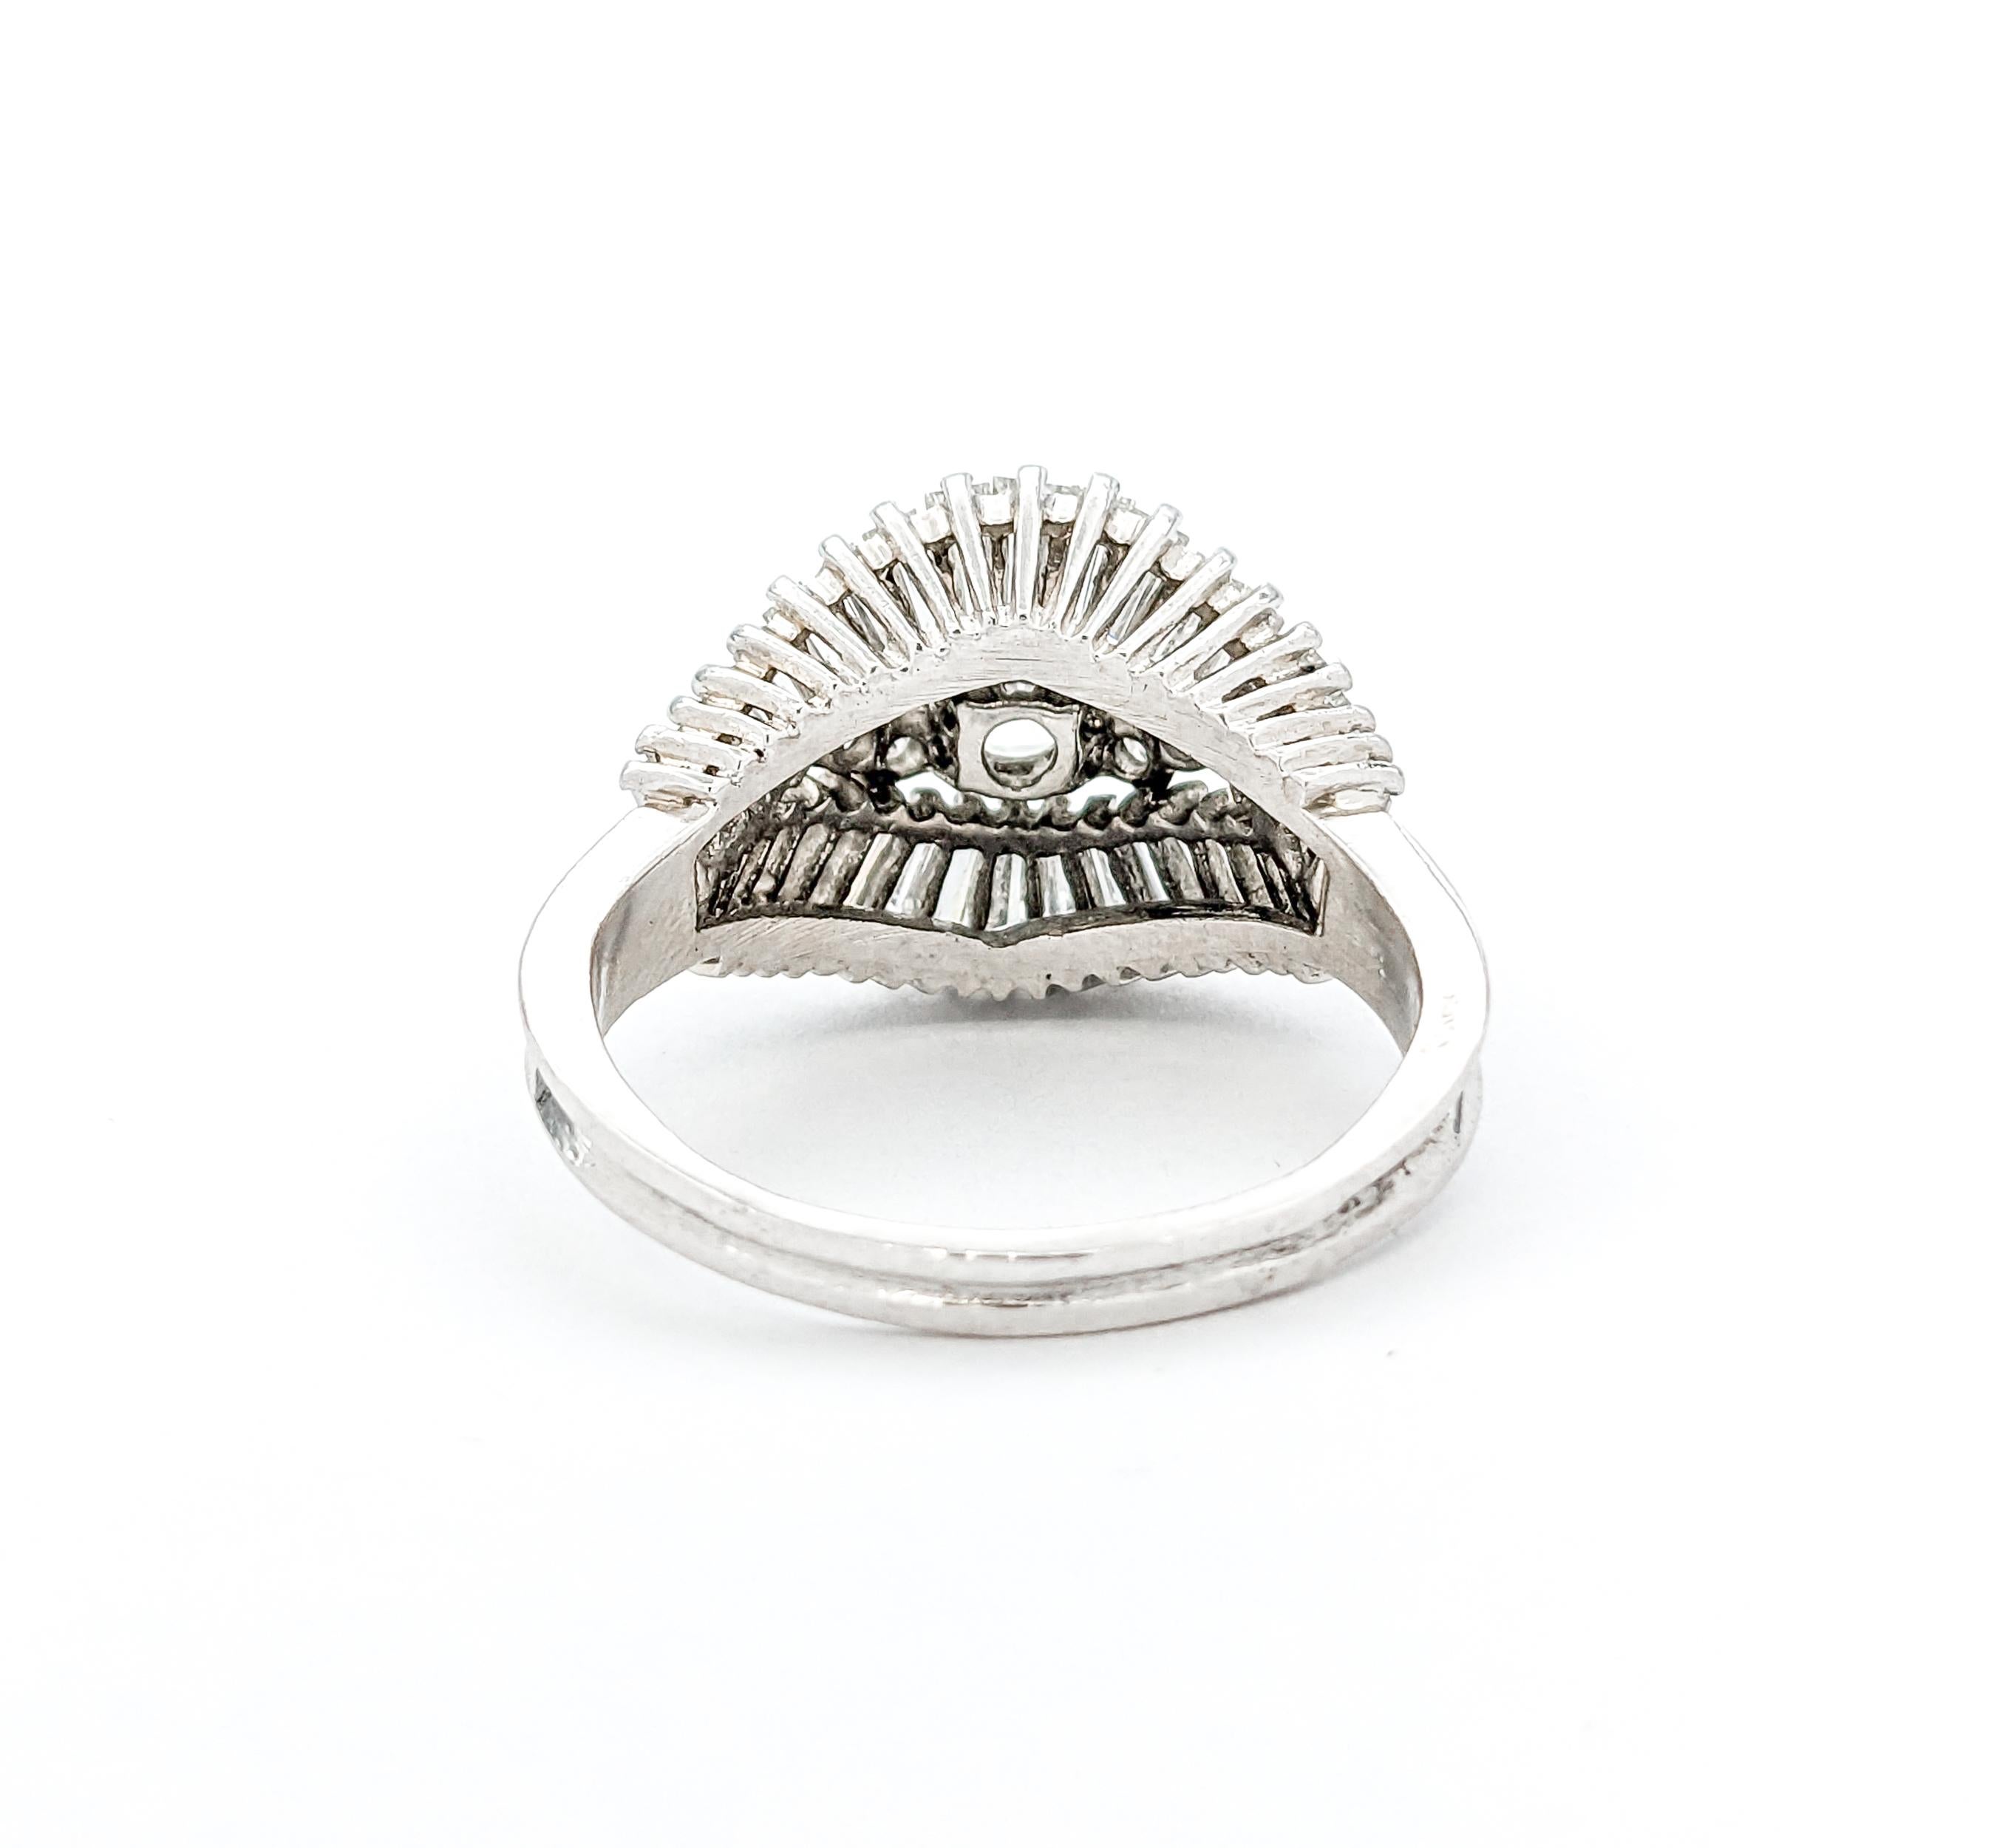 2.25ctw Diamond Fashion Ring in Platinum In Excellent Condition For Sale In Bloomington, MN